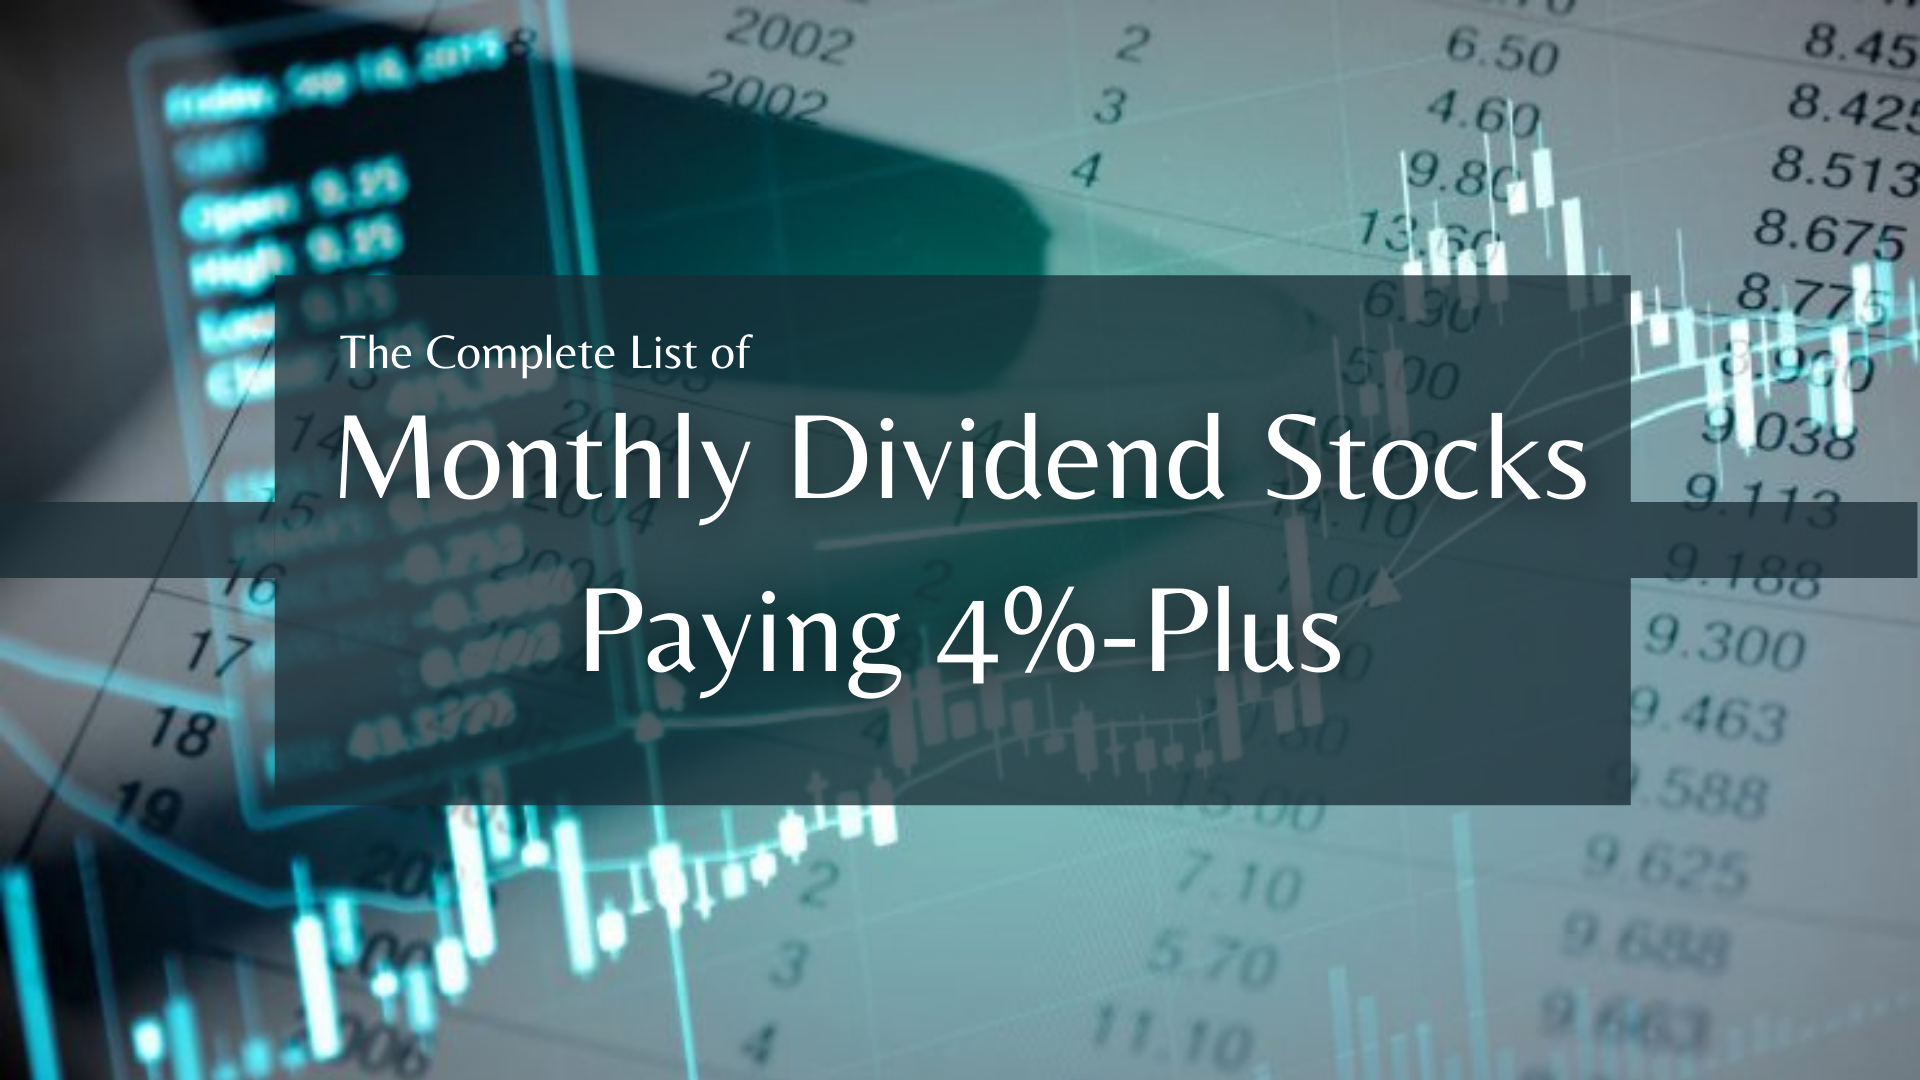 The Complete List of Monthly Dividend Stocks Paying 4Plus